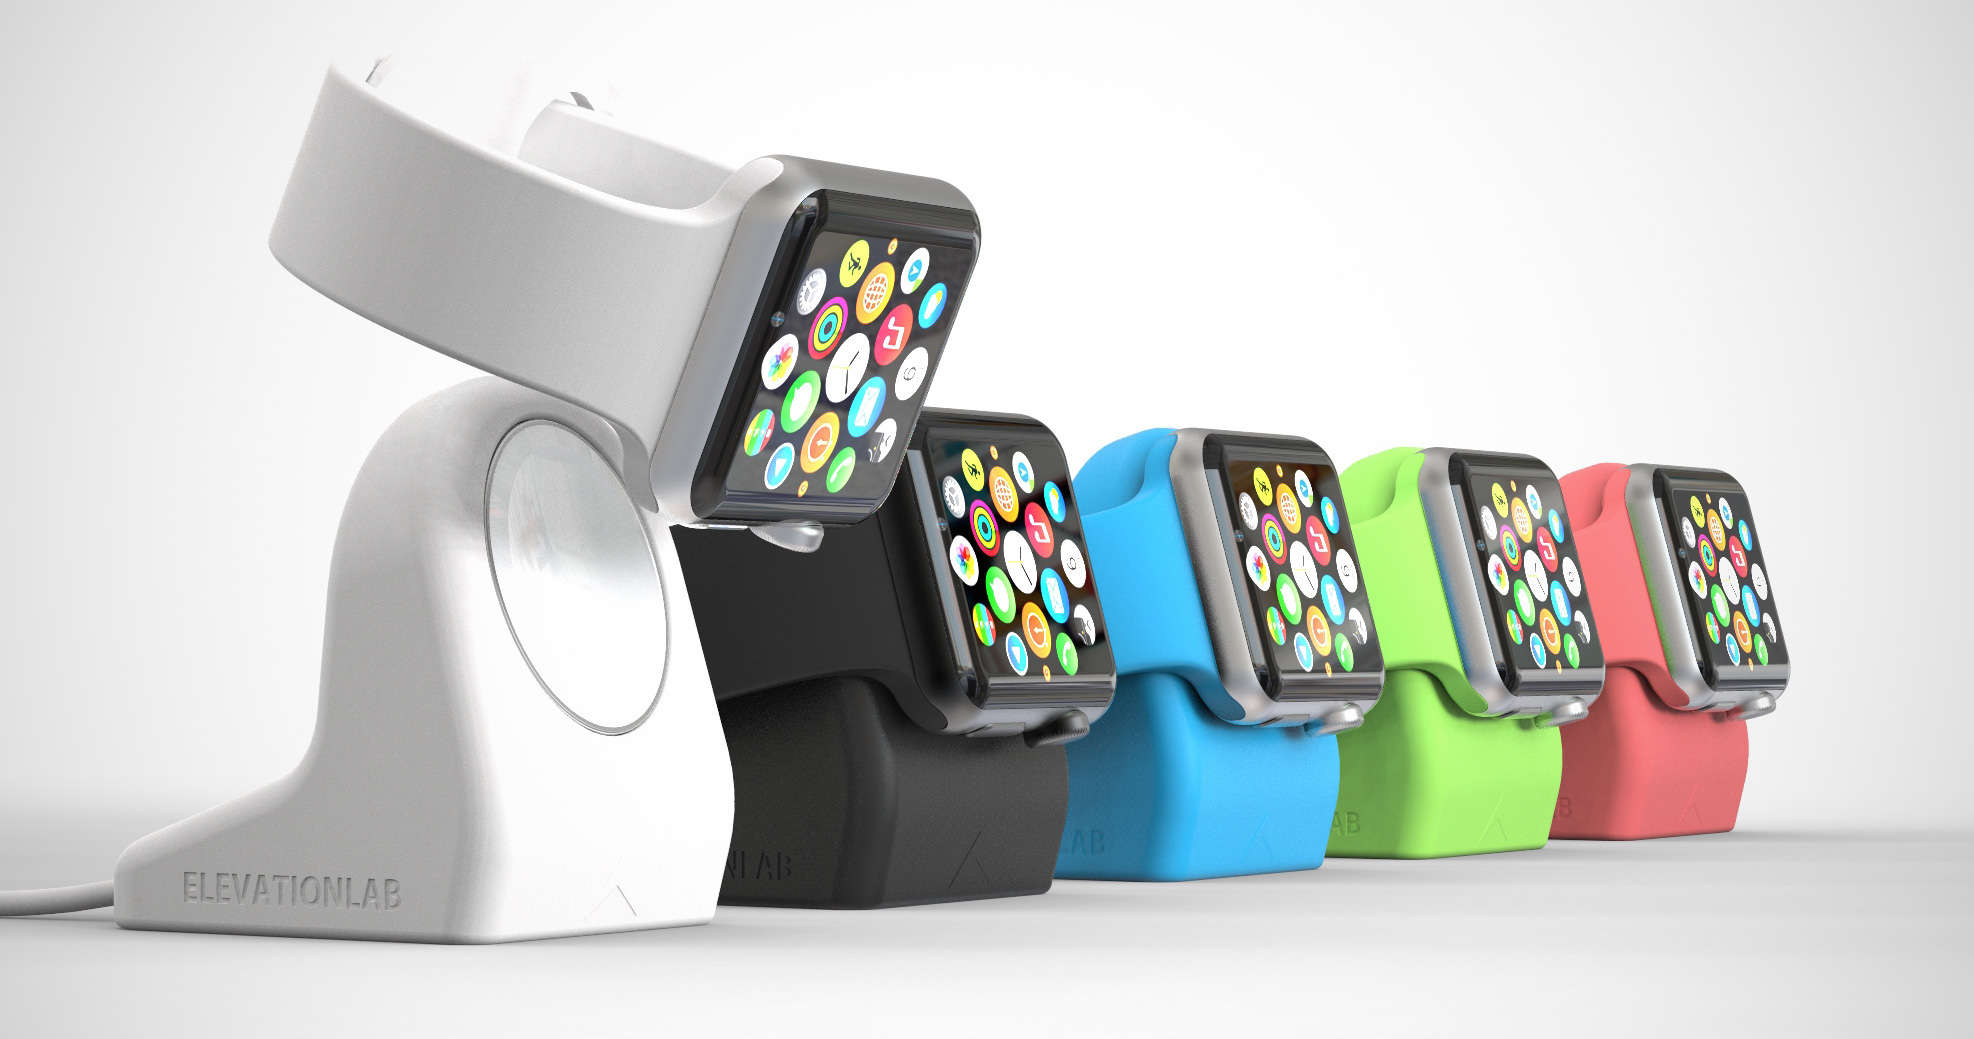 NightStand is the first third-party Apple Watch accessory in Apple Stores.